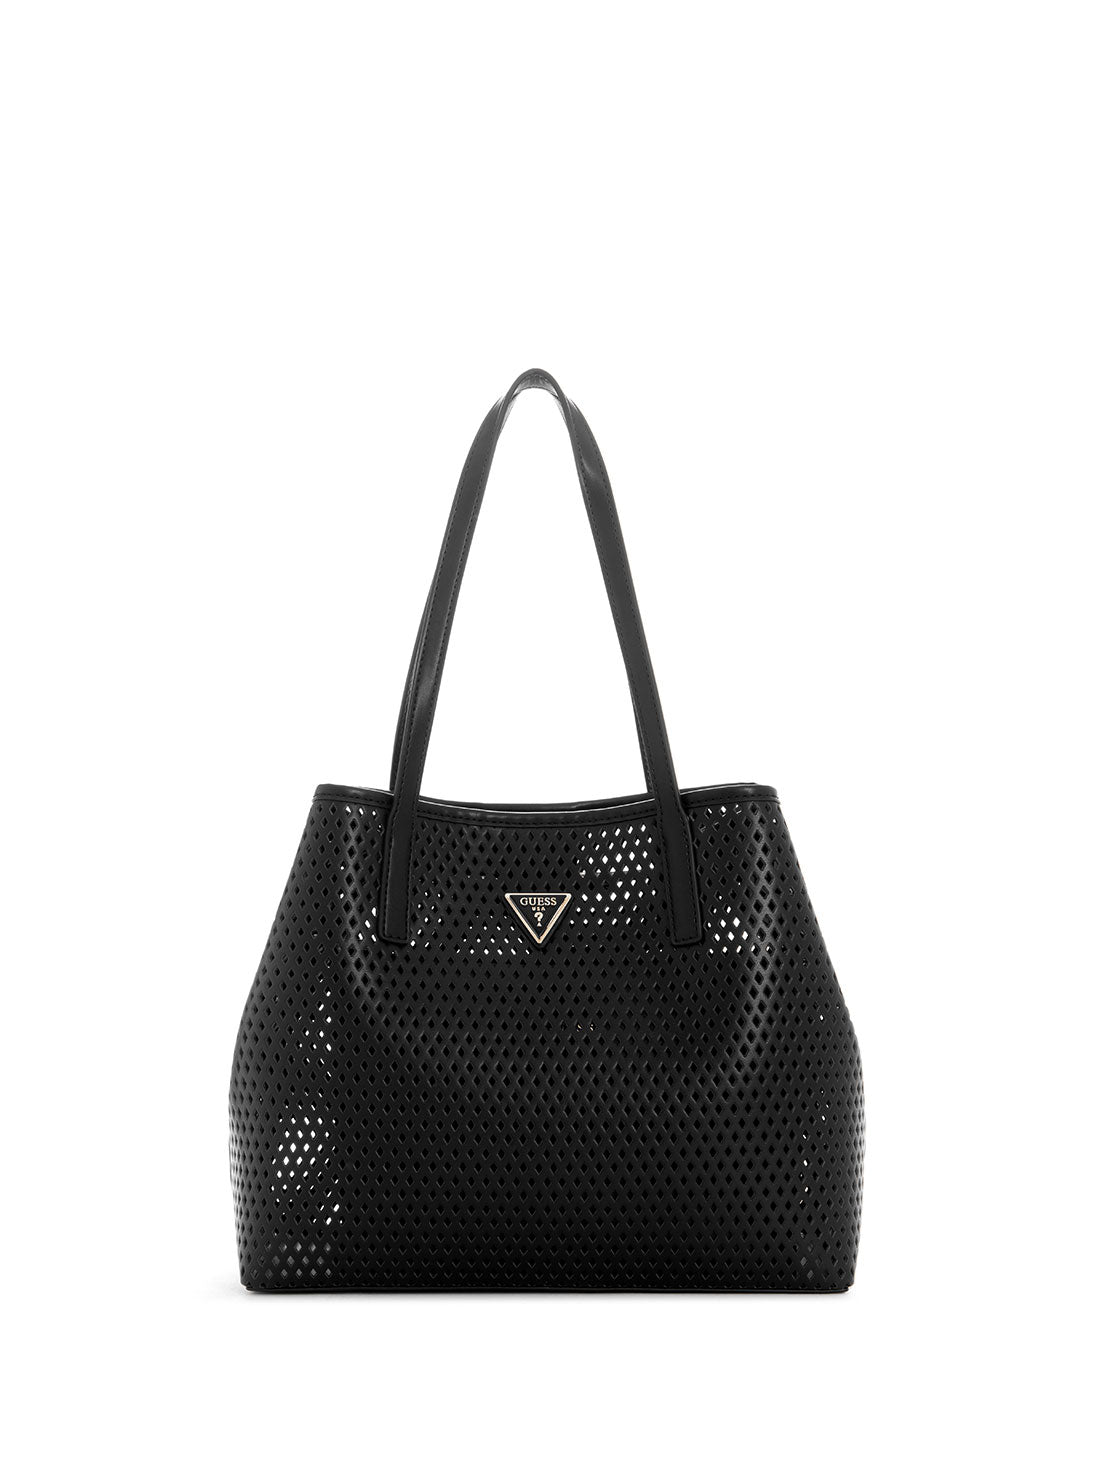 GUESS Women's Black Woven Vikky Tote Bag WP699523 Front View